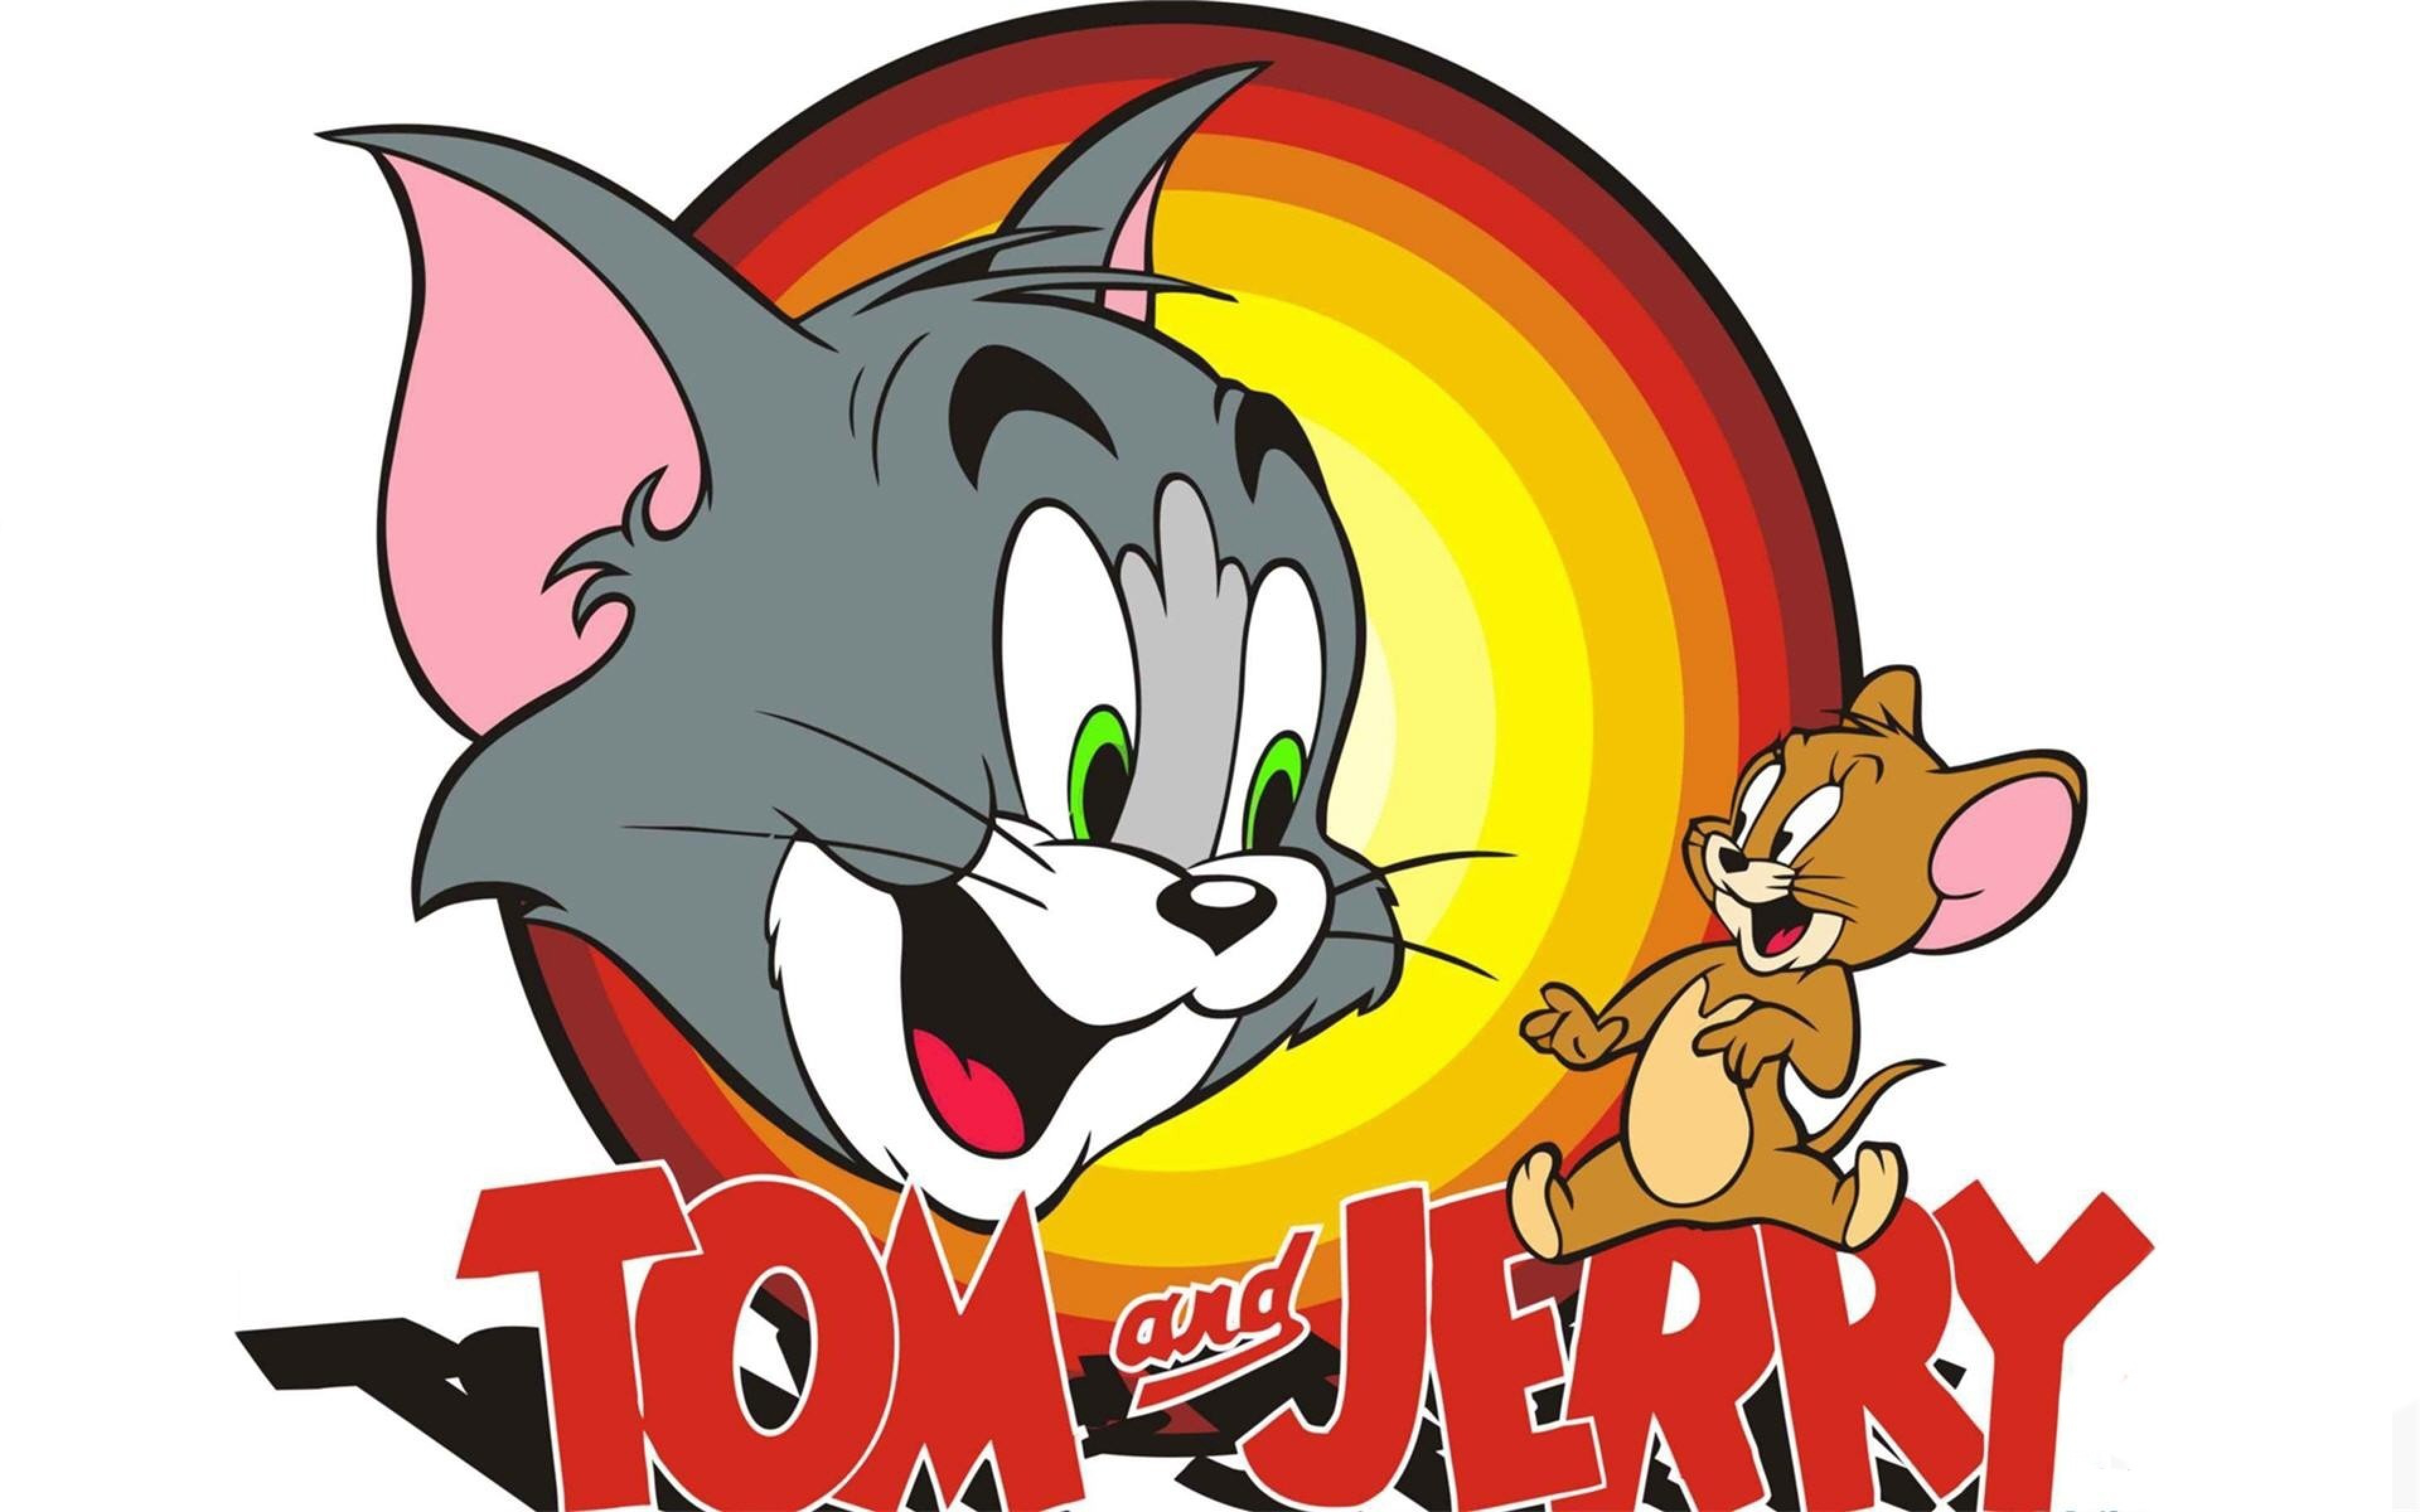 Tom and jerry logo clipart microsoft 